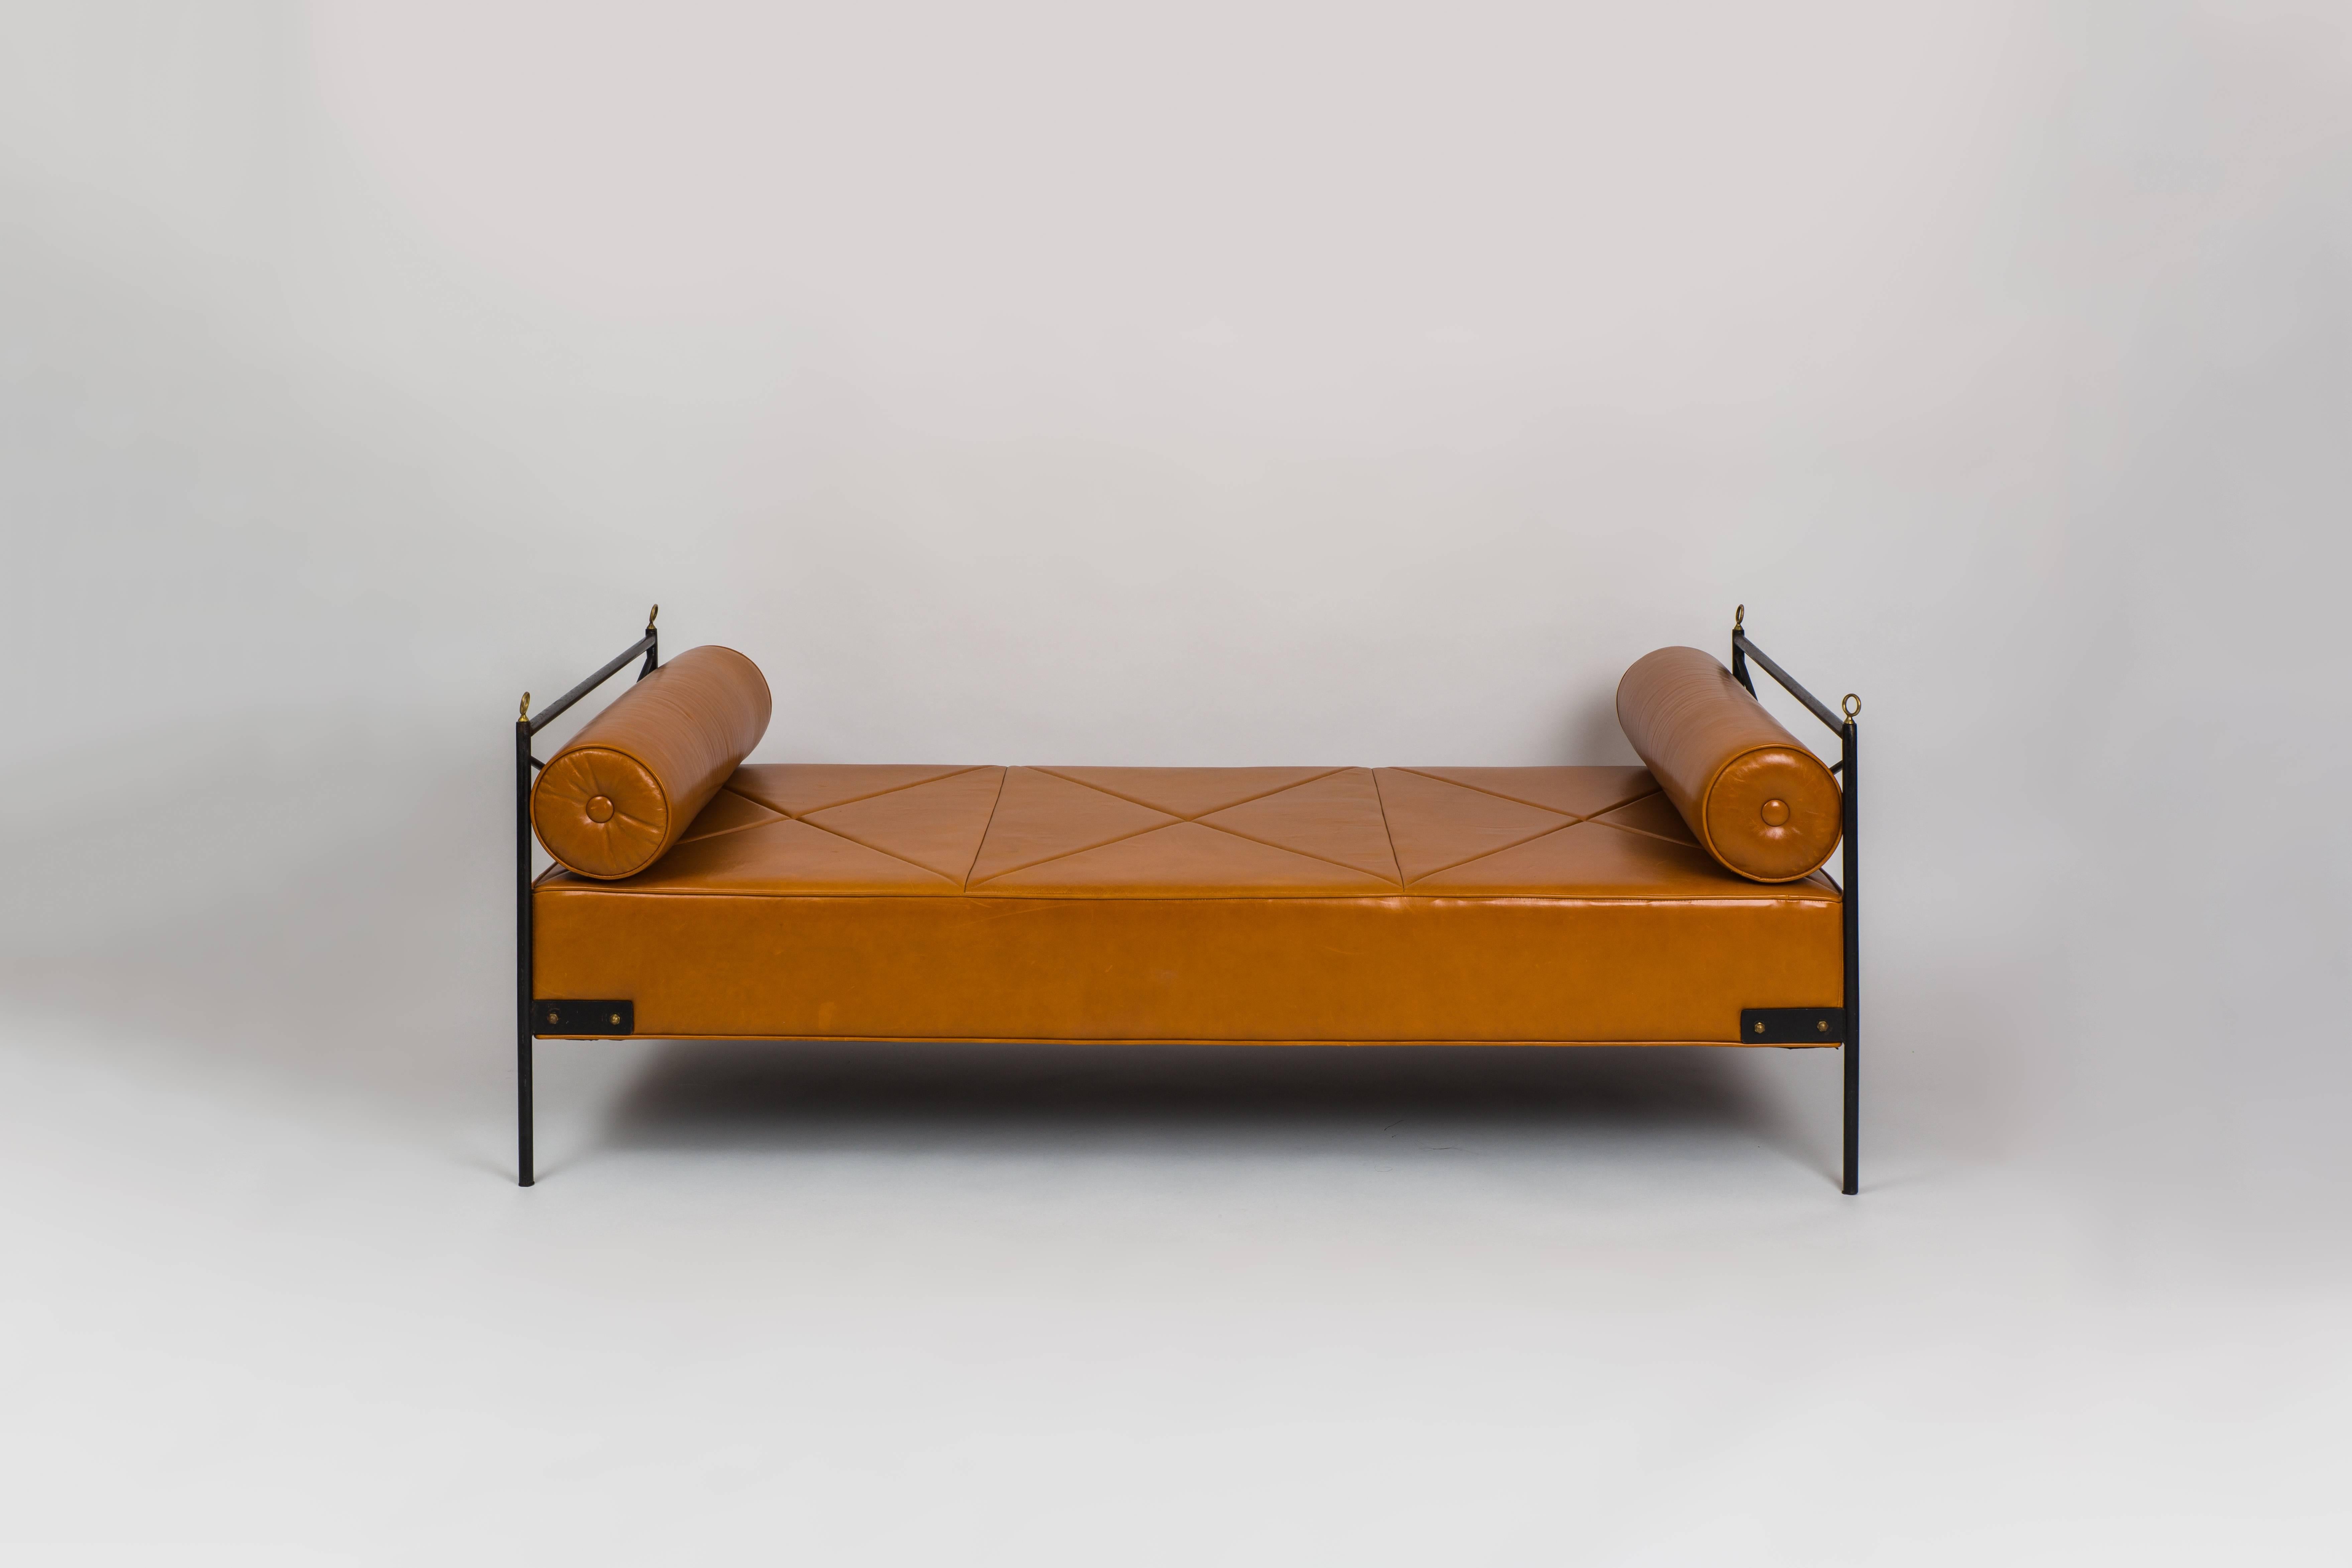 André Arbus daybed composed of wrought iron frame with bronze details, upholstered in cognac leather with two bolsters, France, 1940s. Very chic modernist Art Deco design and beautifully crafted with great details in the daybed frame and leather